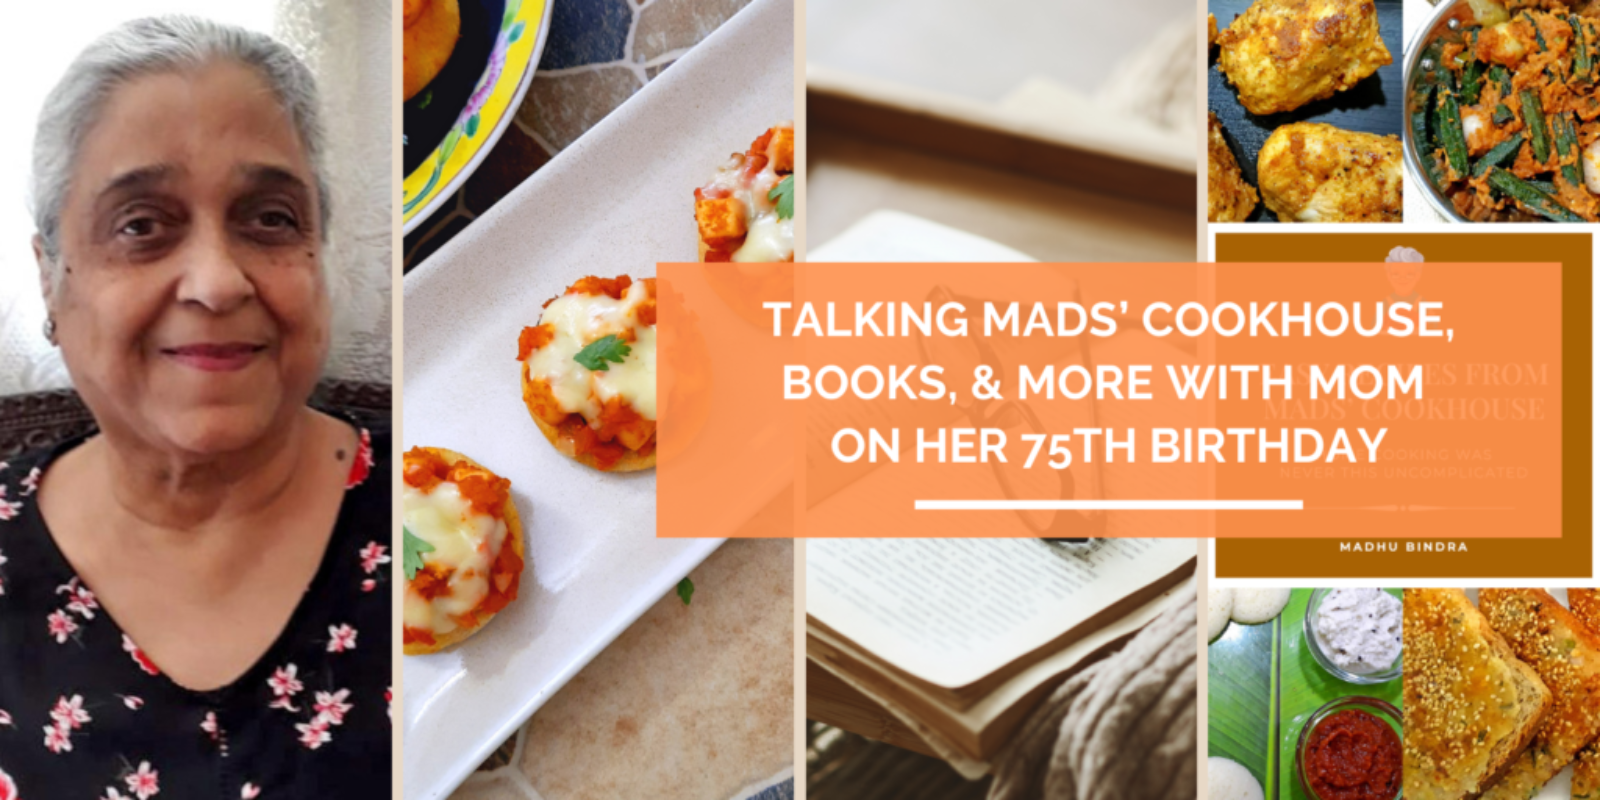 Talking Mads Cookhouse Books More with Mom on her 75th Birthday